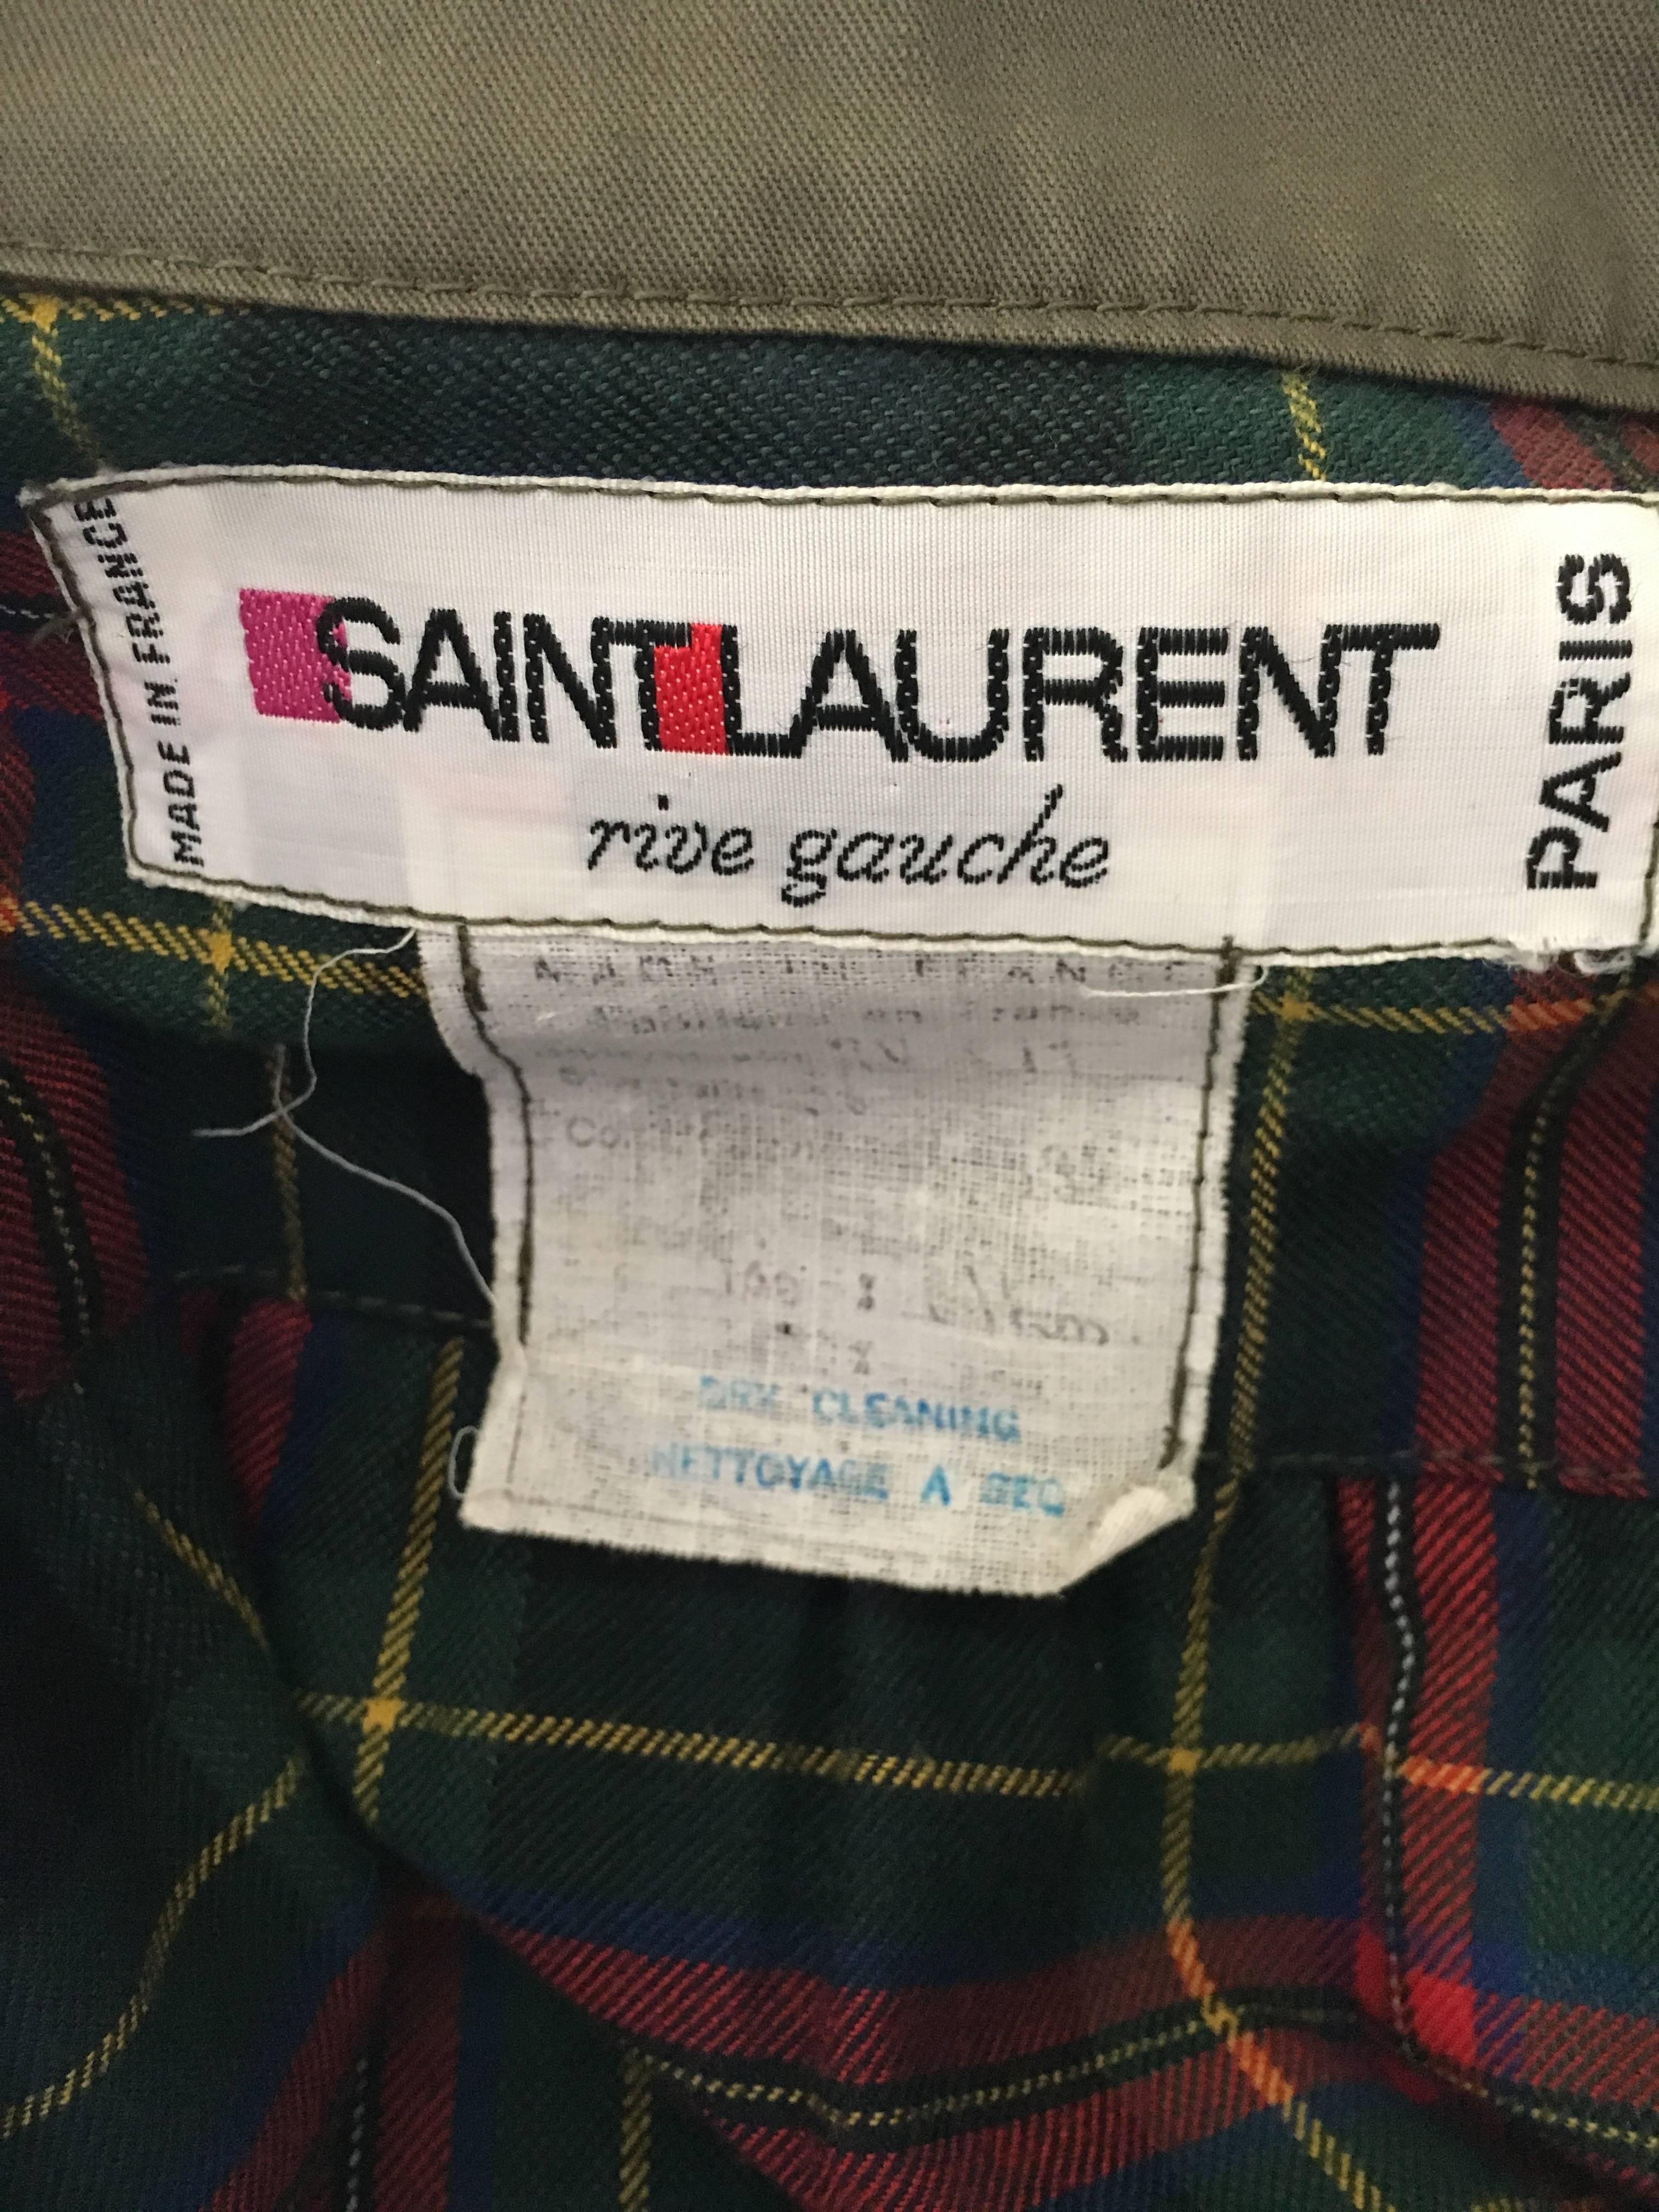 Saint Laurent Rive Gauche 1970's Olive Green Coat with Plaid Fleece Lining.
A classic from around 1977, the label reads 